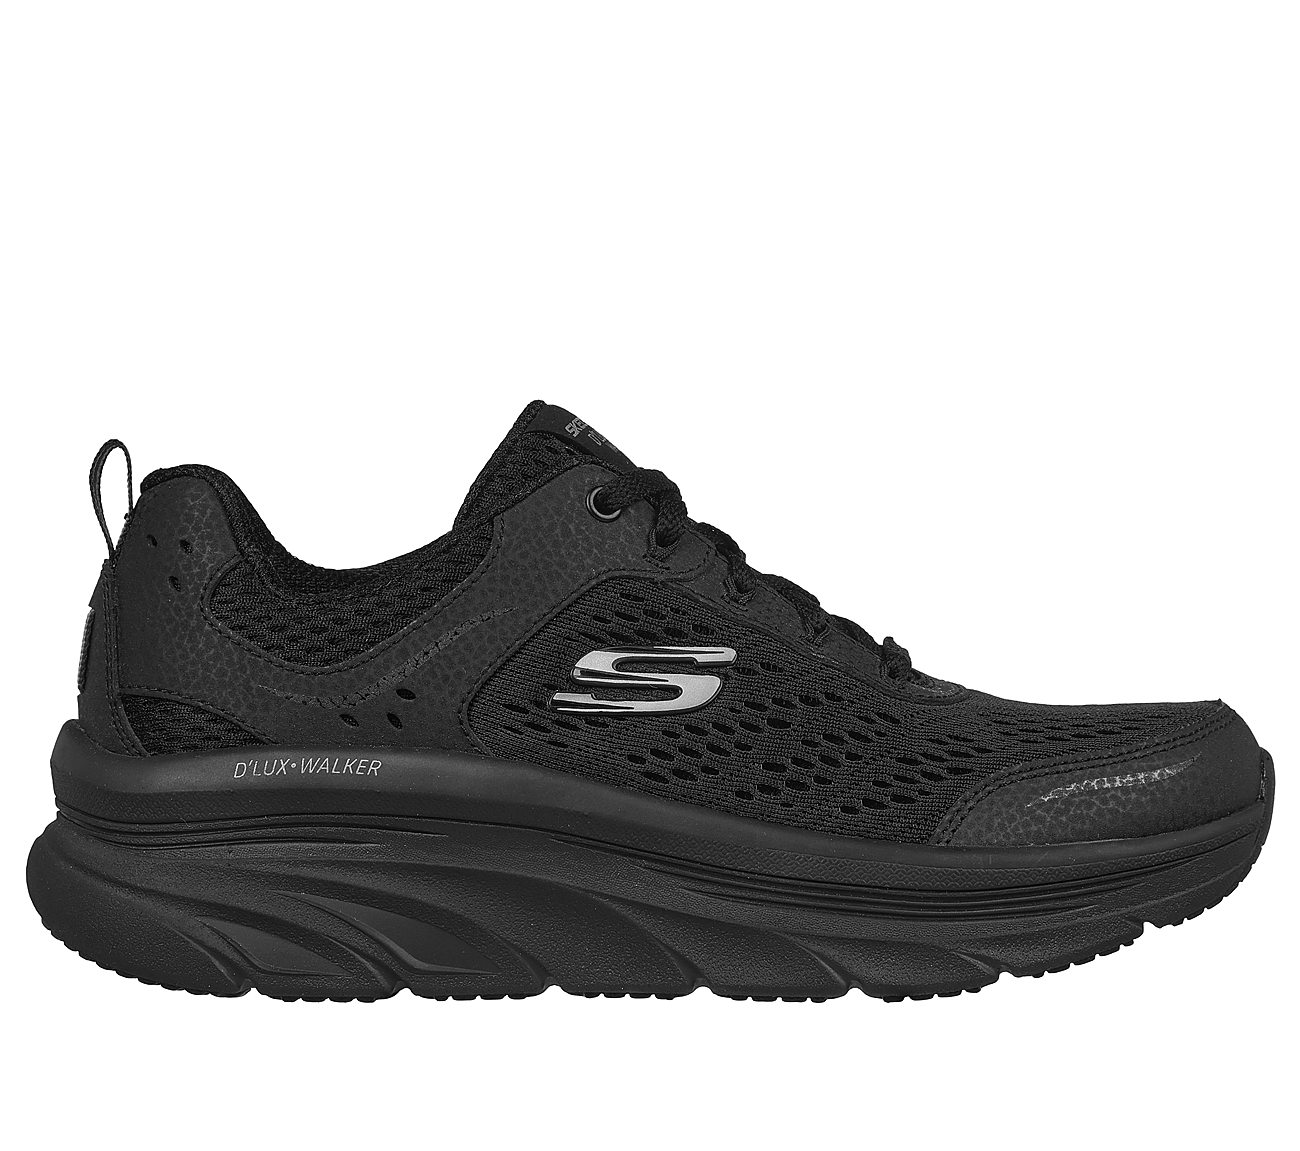 skechers relaxed fit lifestyle ayakkabı